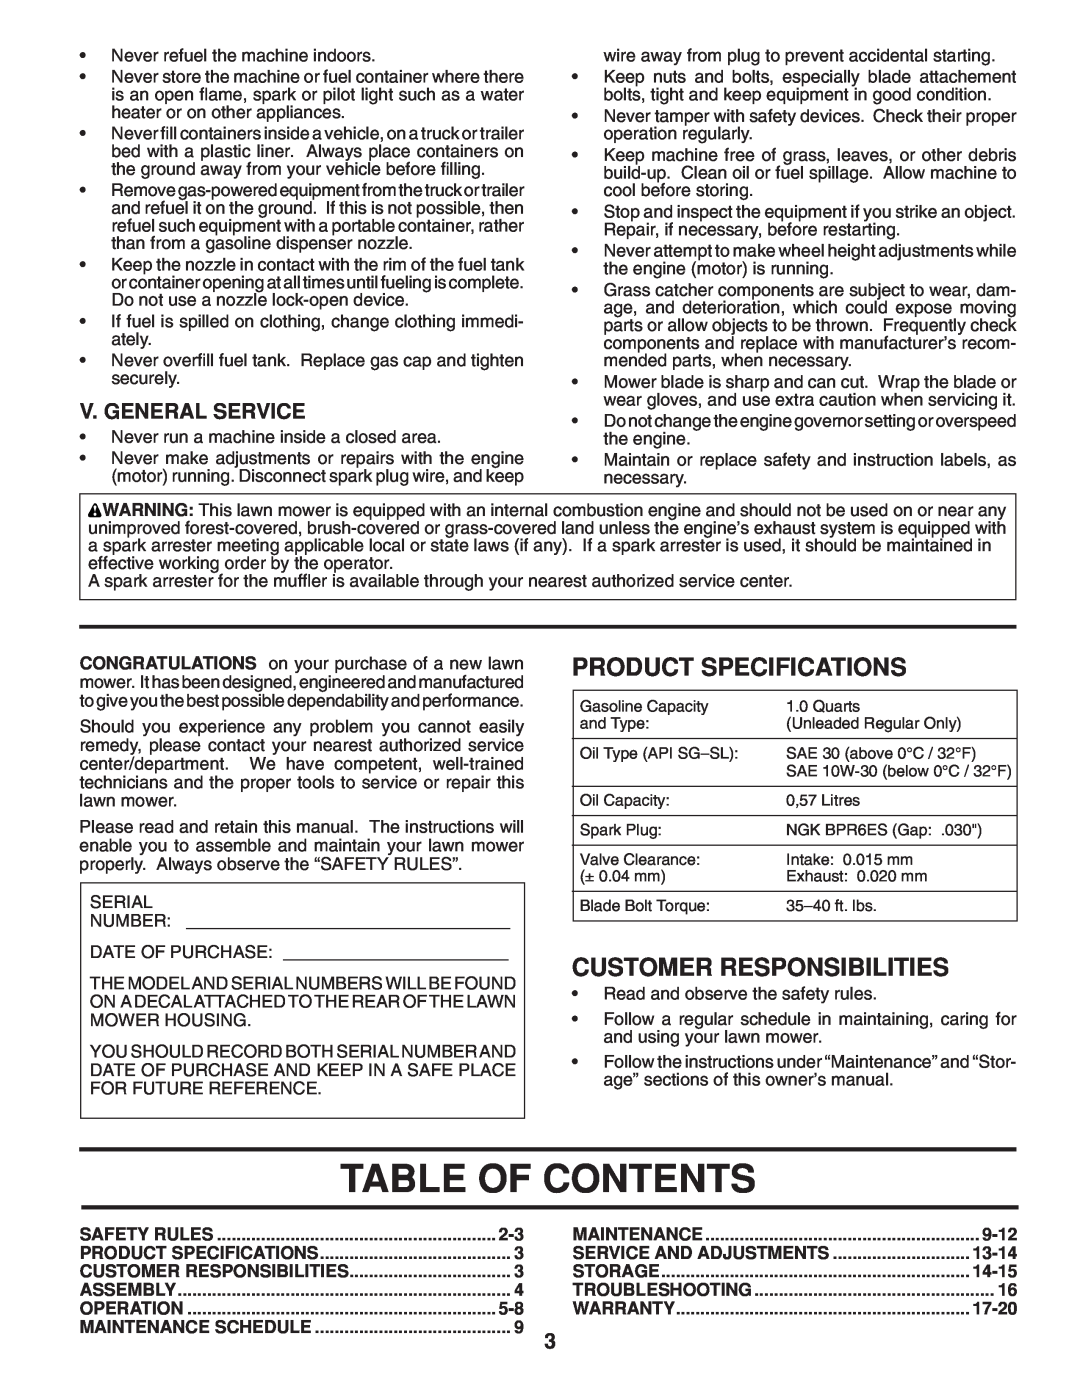 Husqvarna 961430097 manual Table Of Contents, Product Specifications, Customer Responsibilities, V. General Service 